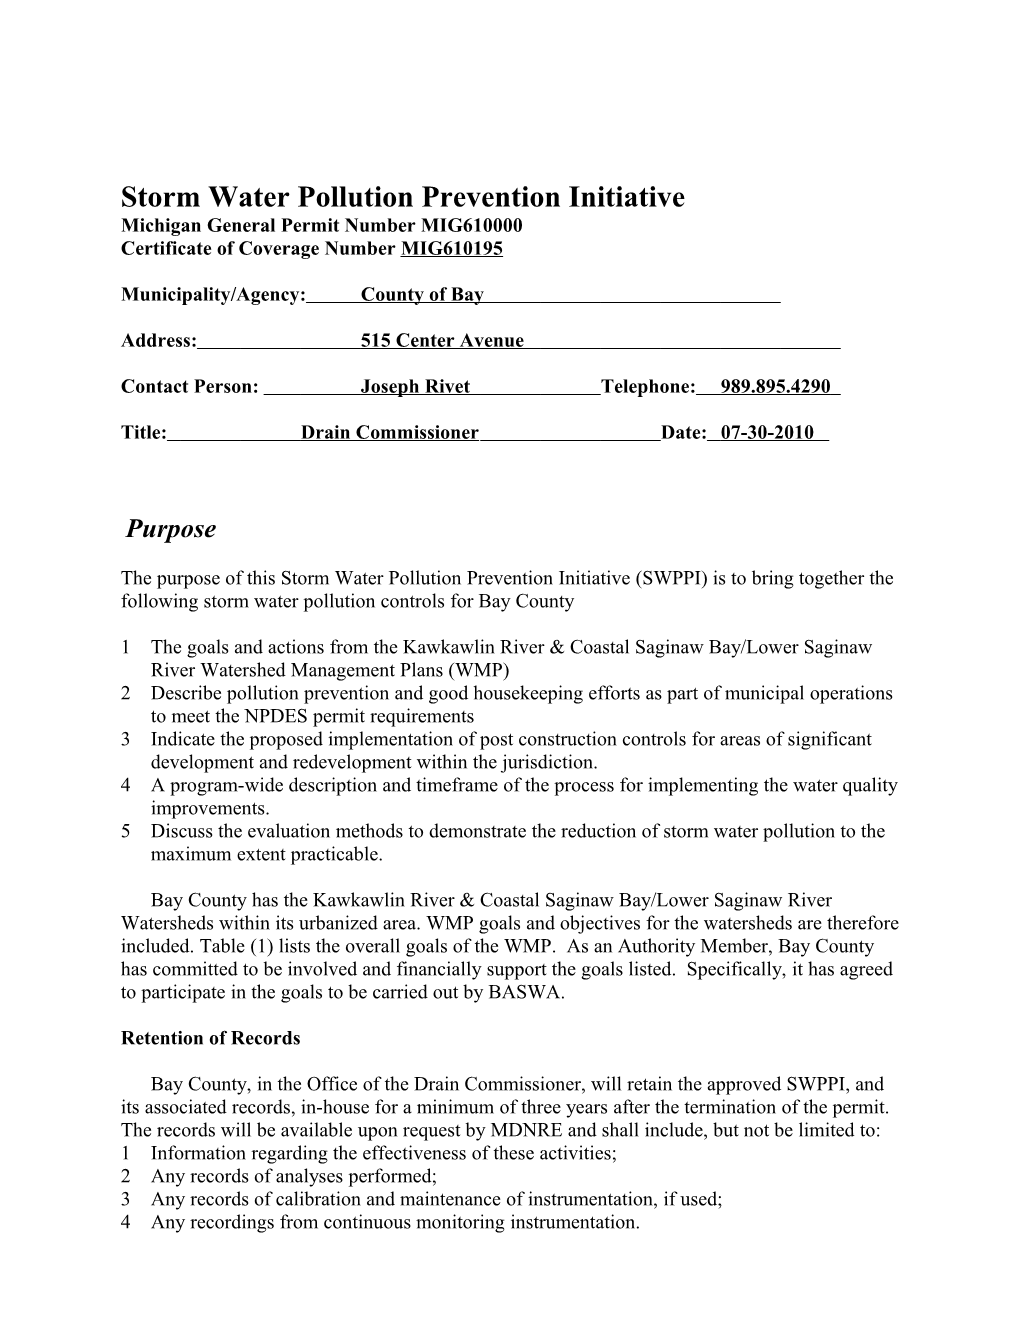 Storm Water Pollution Prevention Initiative